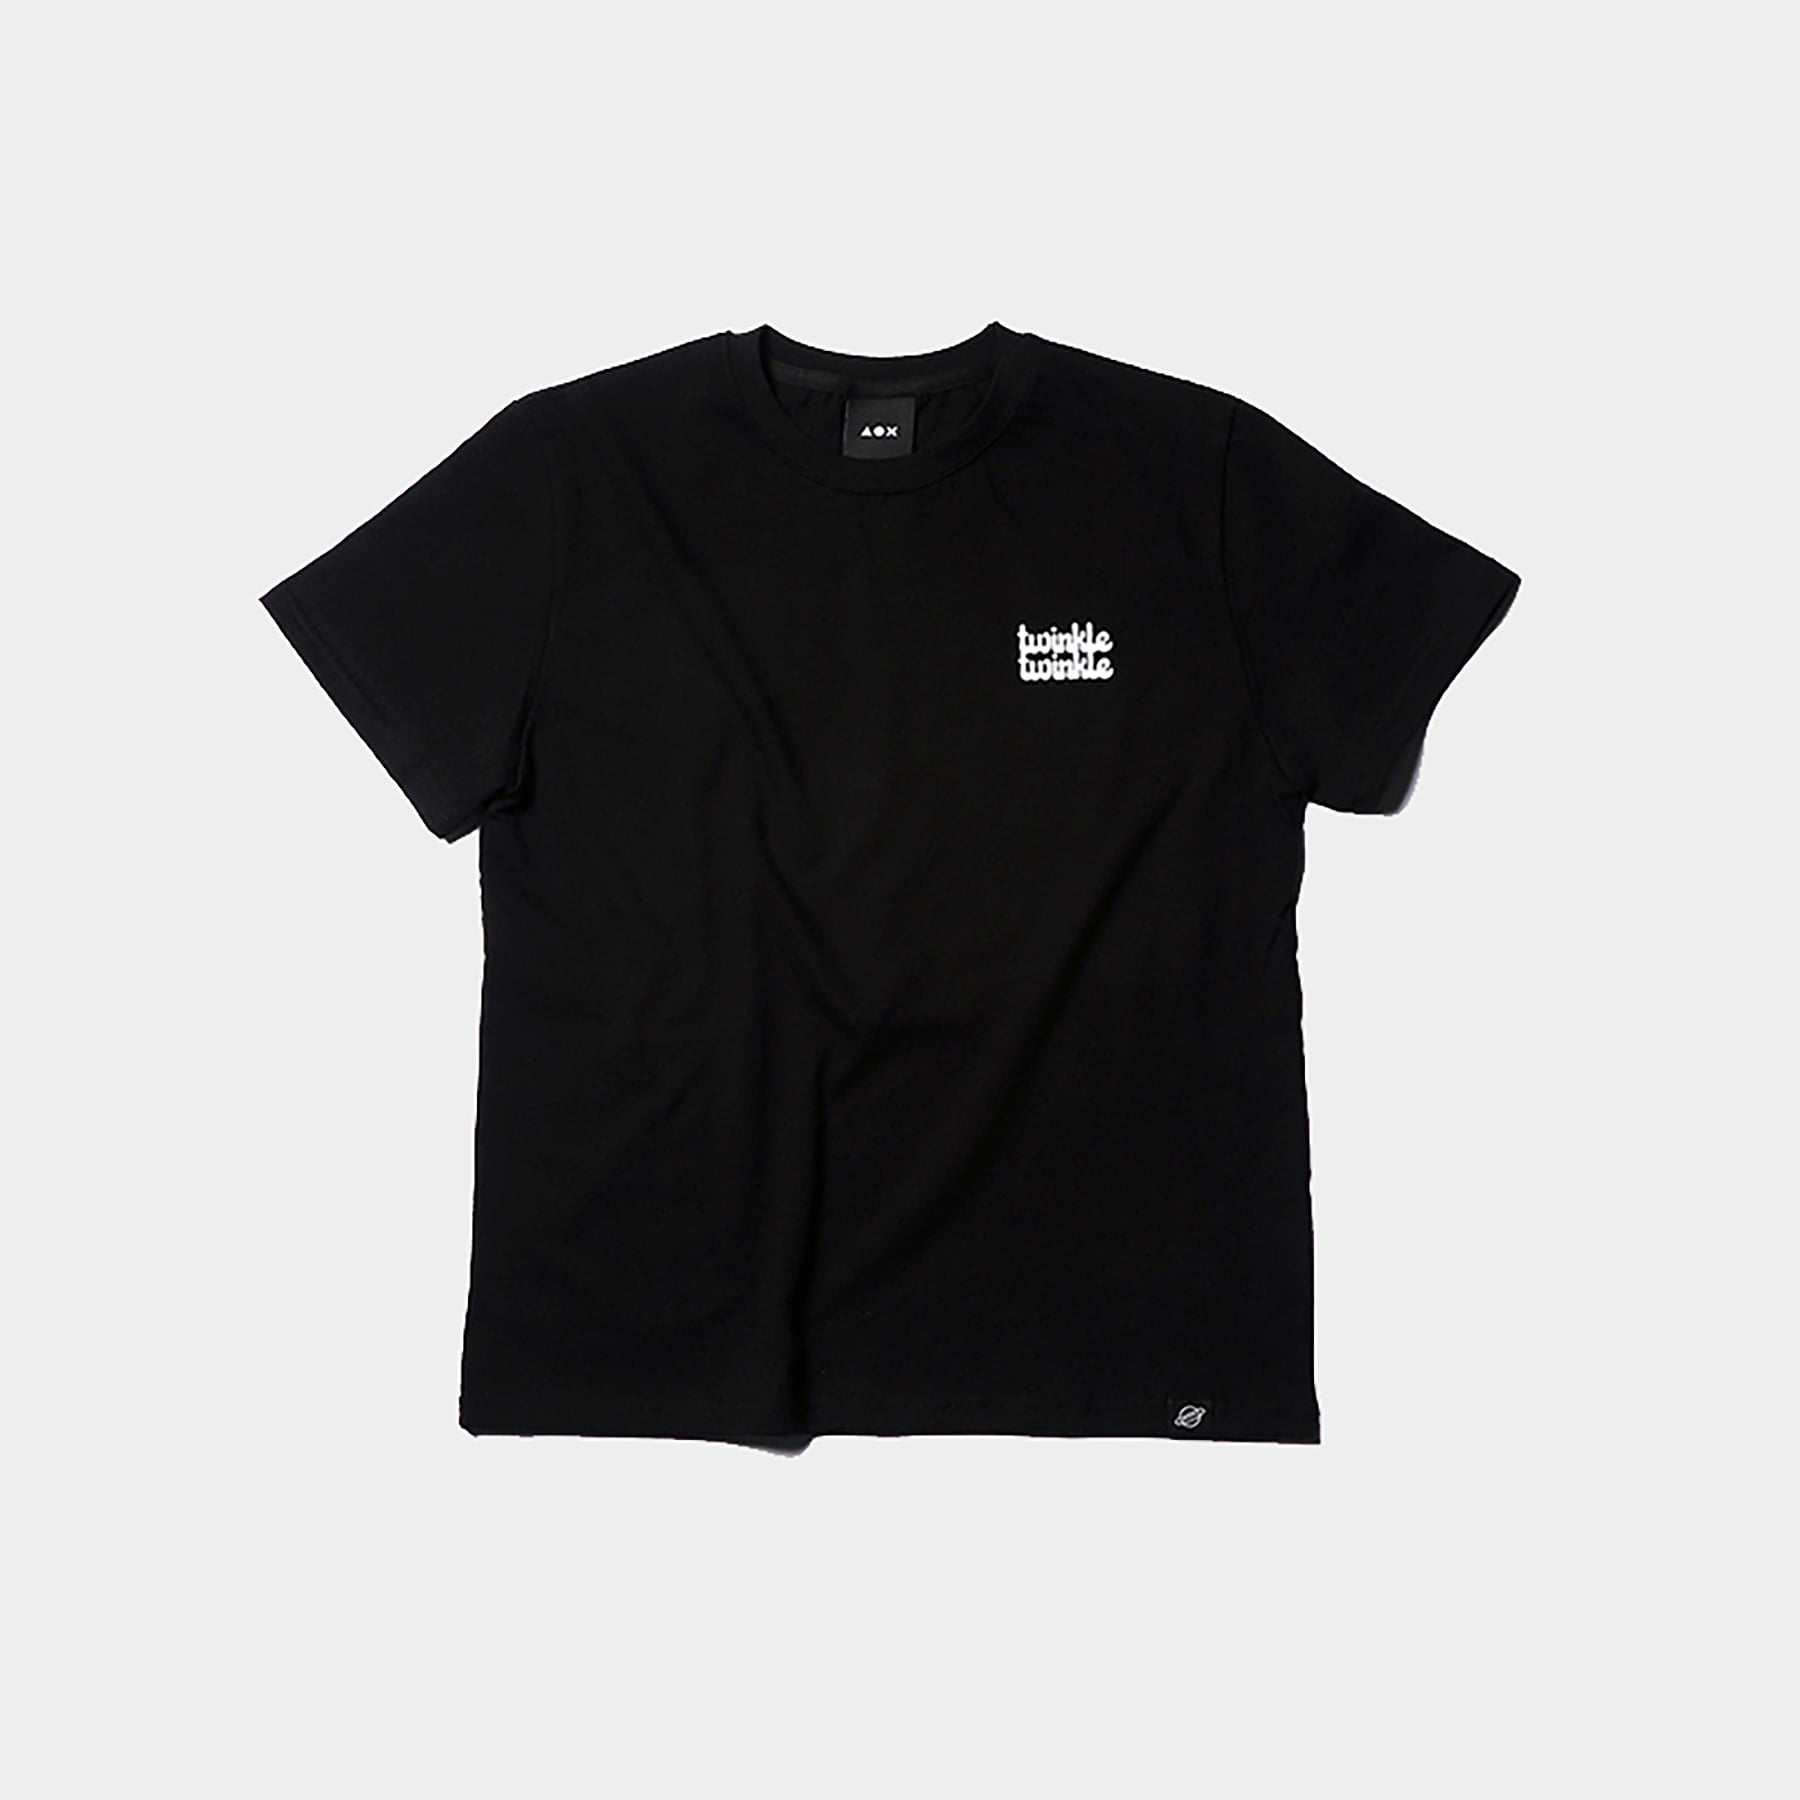 Twinkle point t-shirt (Black)